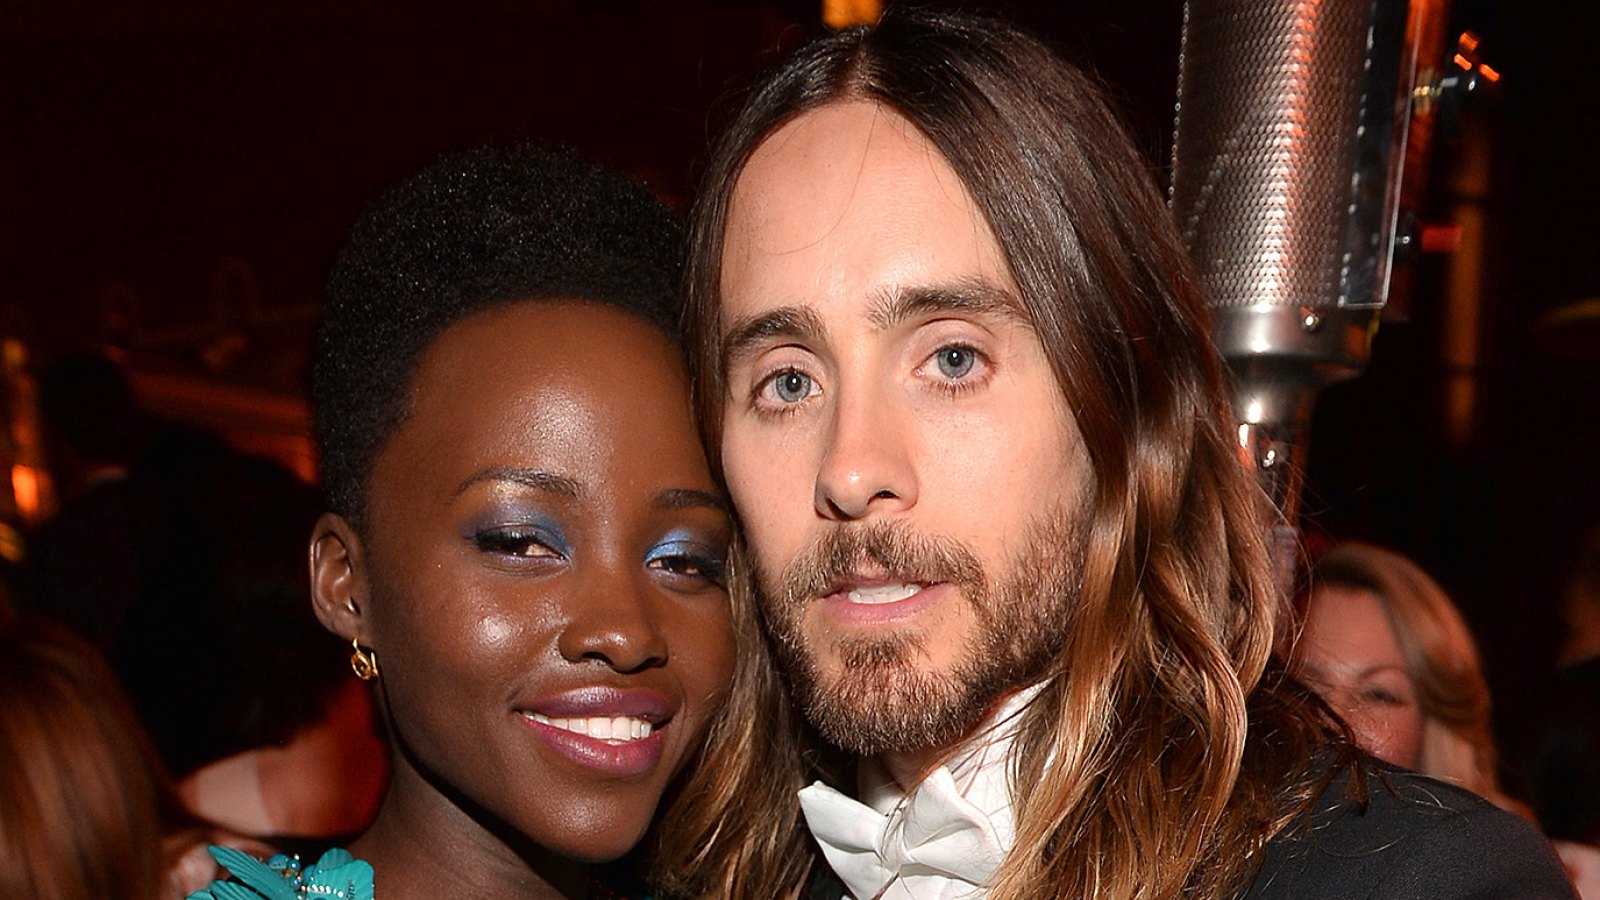 Lupita Nyong’o: There ‘Was an Intimacy’ With Jared Leto